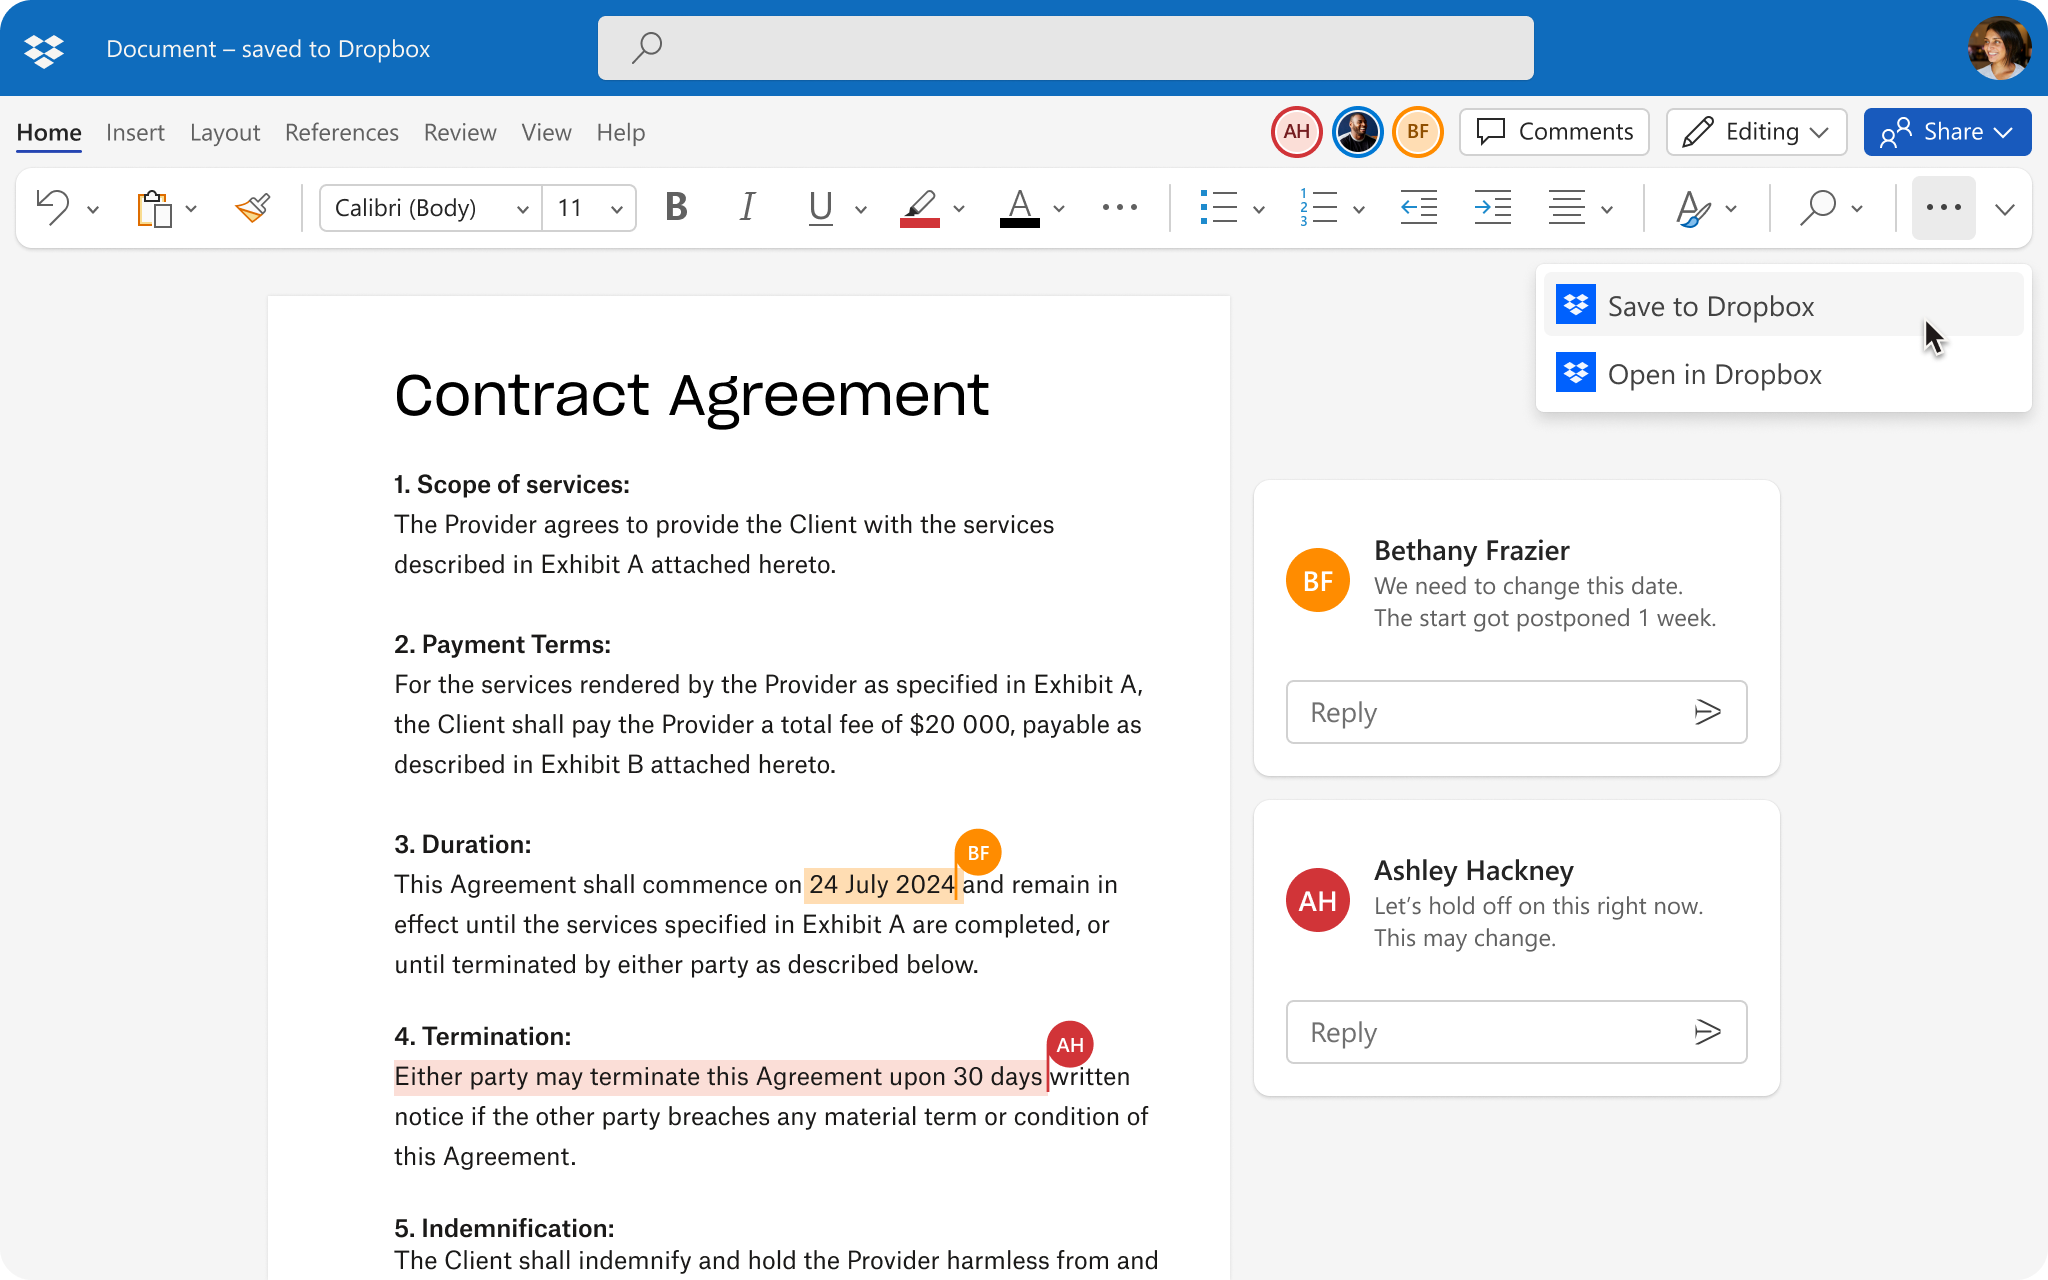 UI of document being edited by multiple people, with option to save changes to Dropbox